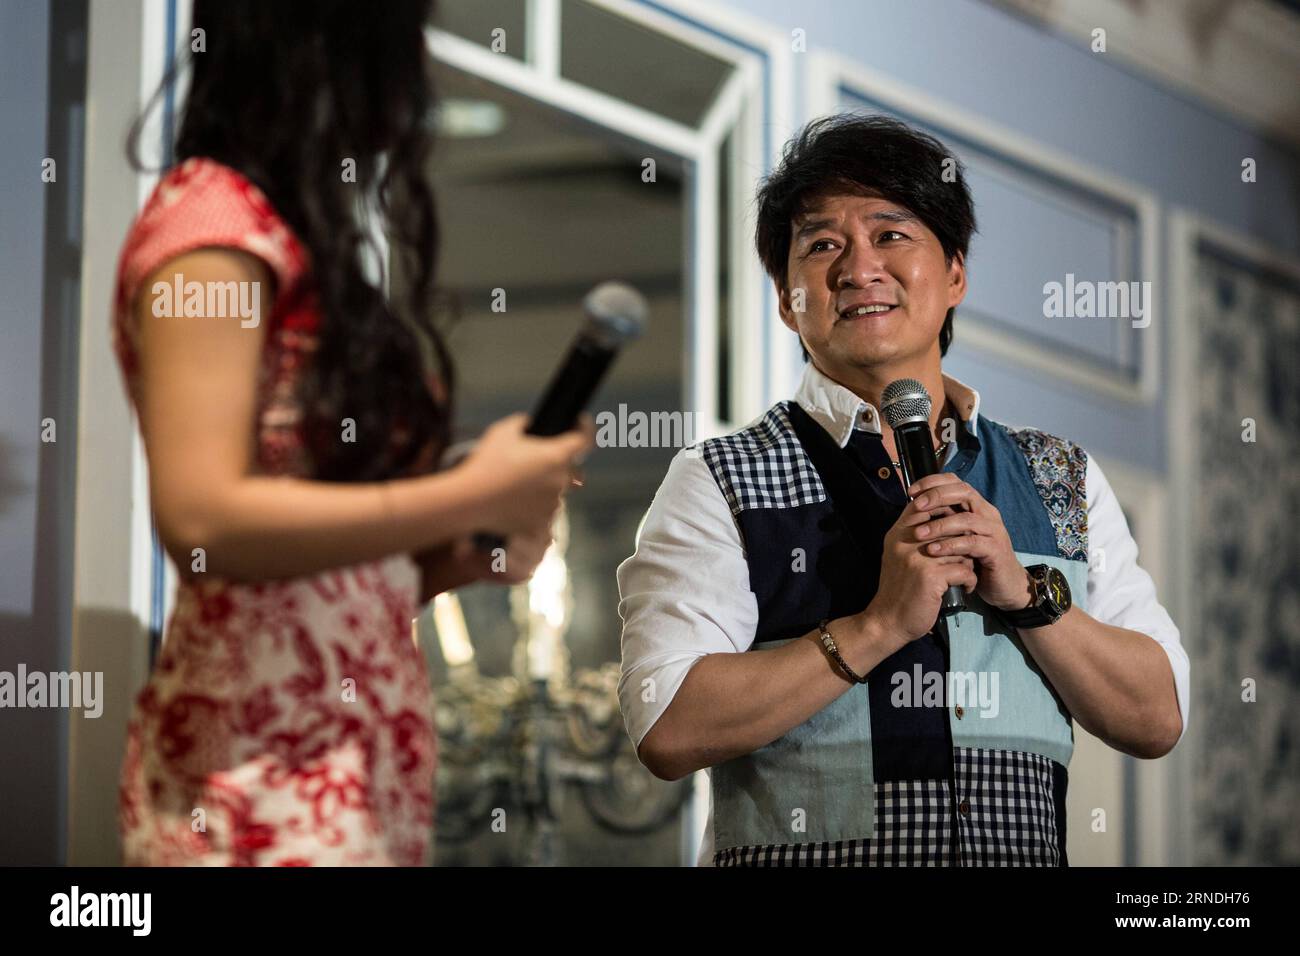 (160520) -- NEW YORK, May 20, 2016 -- Singer Emil Wakin Chau (R) speaks during a press conference for his upcoming concert What we are going to sing today in New York, the United States on May 20, 2016. Emil Wakin Chau will hold his personal concert What we are going to sing today at Lincoln Center in New York on May 22. ) U.S.-NEW YORK-WAKIN CHAU-CONCERT-PRESS CONFERENCE LixMuzi PUBLICATIONxNOTxINxCHN   160520 New York May 20 2016 Singer Emil Wakin Chau r Speaks during a Press Conference for His upcoming Concert What We are Going to Sing Today in New York The United States ON May 20 2016 Emil Stock Photo